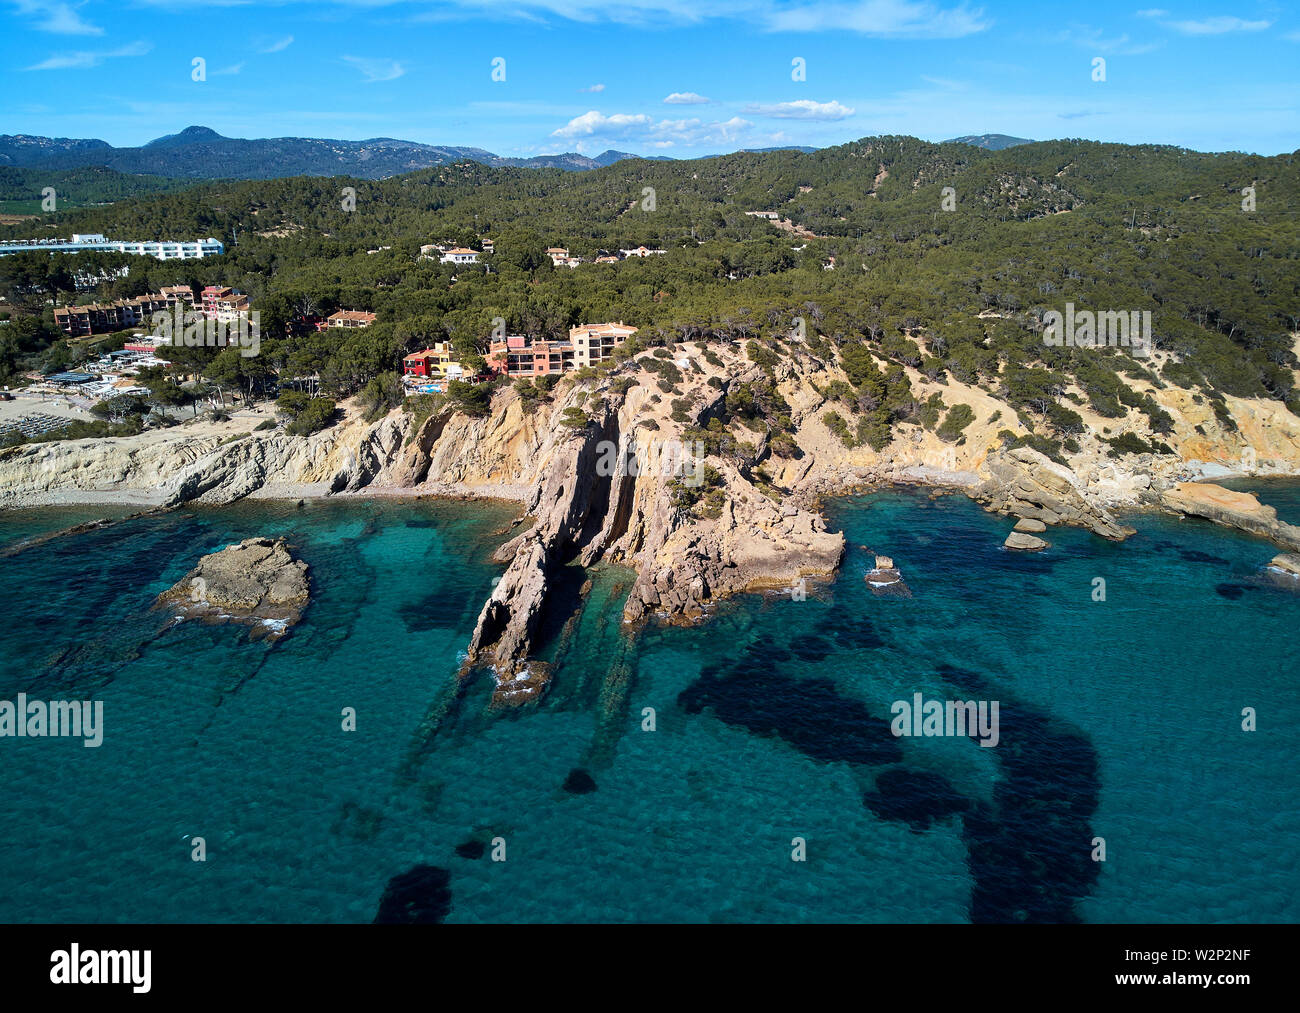 Aerial phto of Palma de Mallorca coastal seaside stony beaches turquoise colored Mediterranean Sea water panoramic waterside view from above, Spain Stock Photo